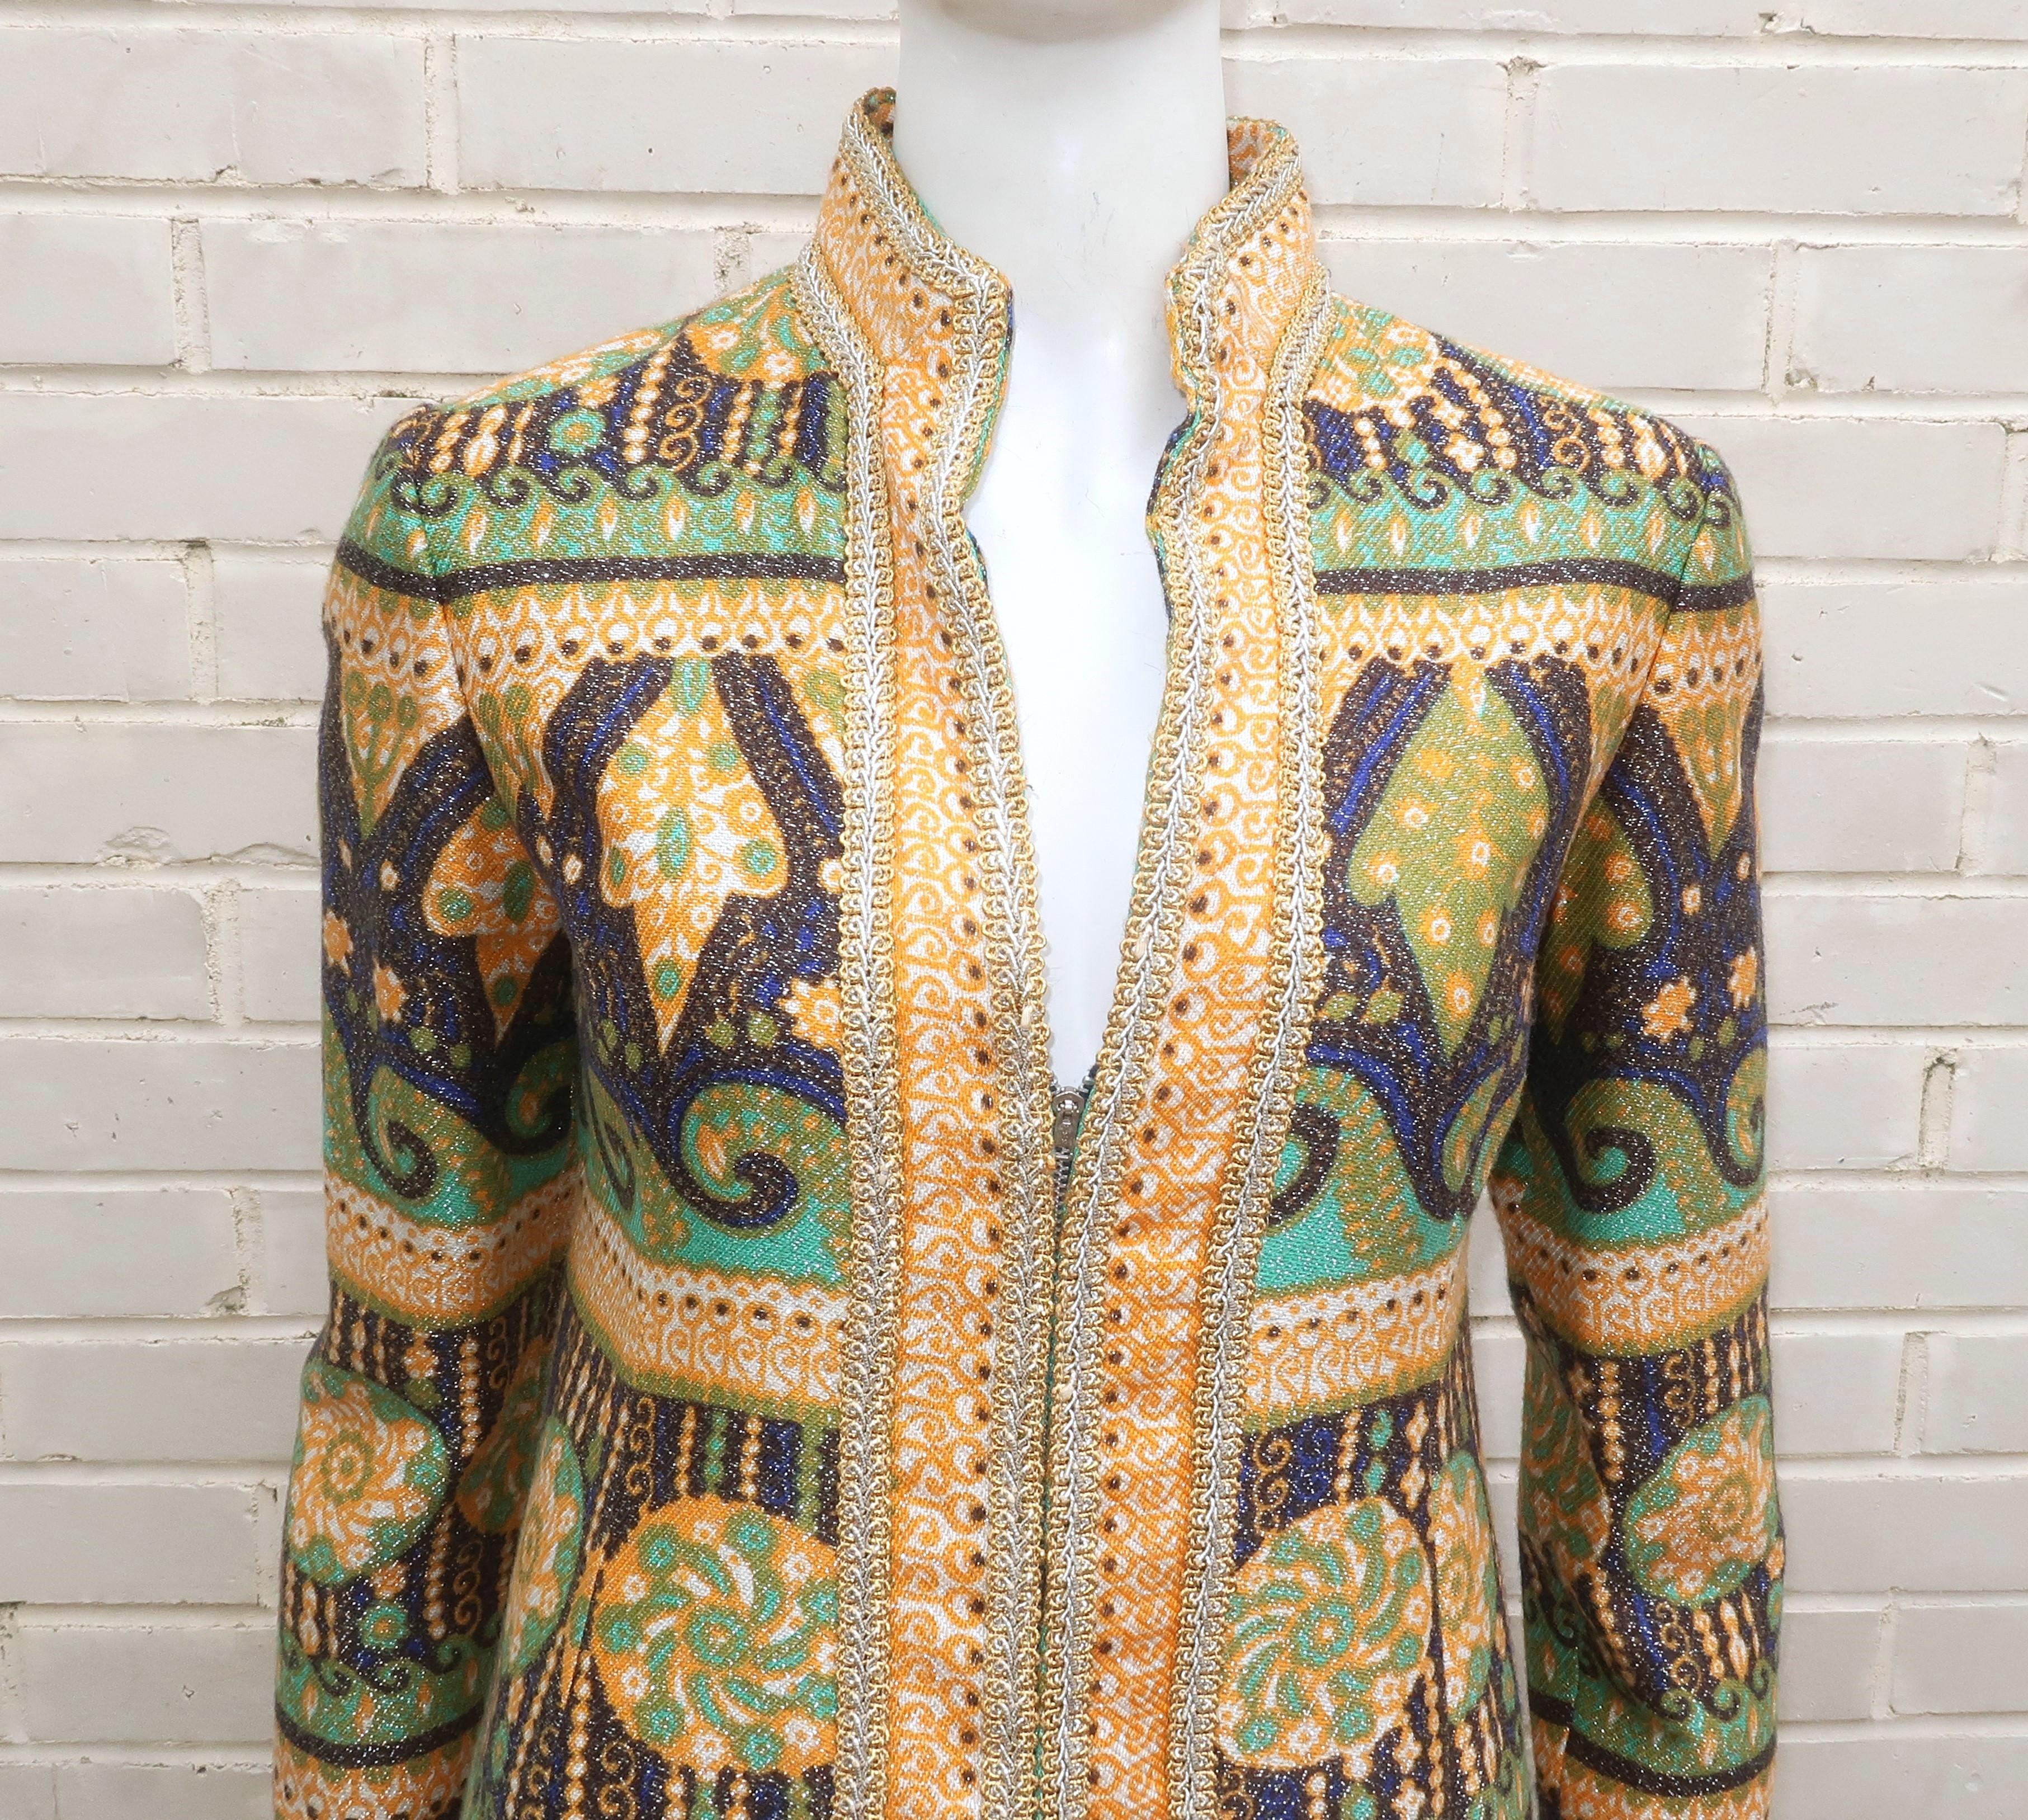 1960’s Elinor Simmons for Malcolm Starr gold lamé pant suit in shades of blue, aqua, orange and green with an exotic geometric print.  The Nehru style coat zips at the front with gold and silver braid trim.  The coordinating pants zip at the front